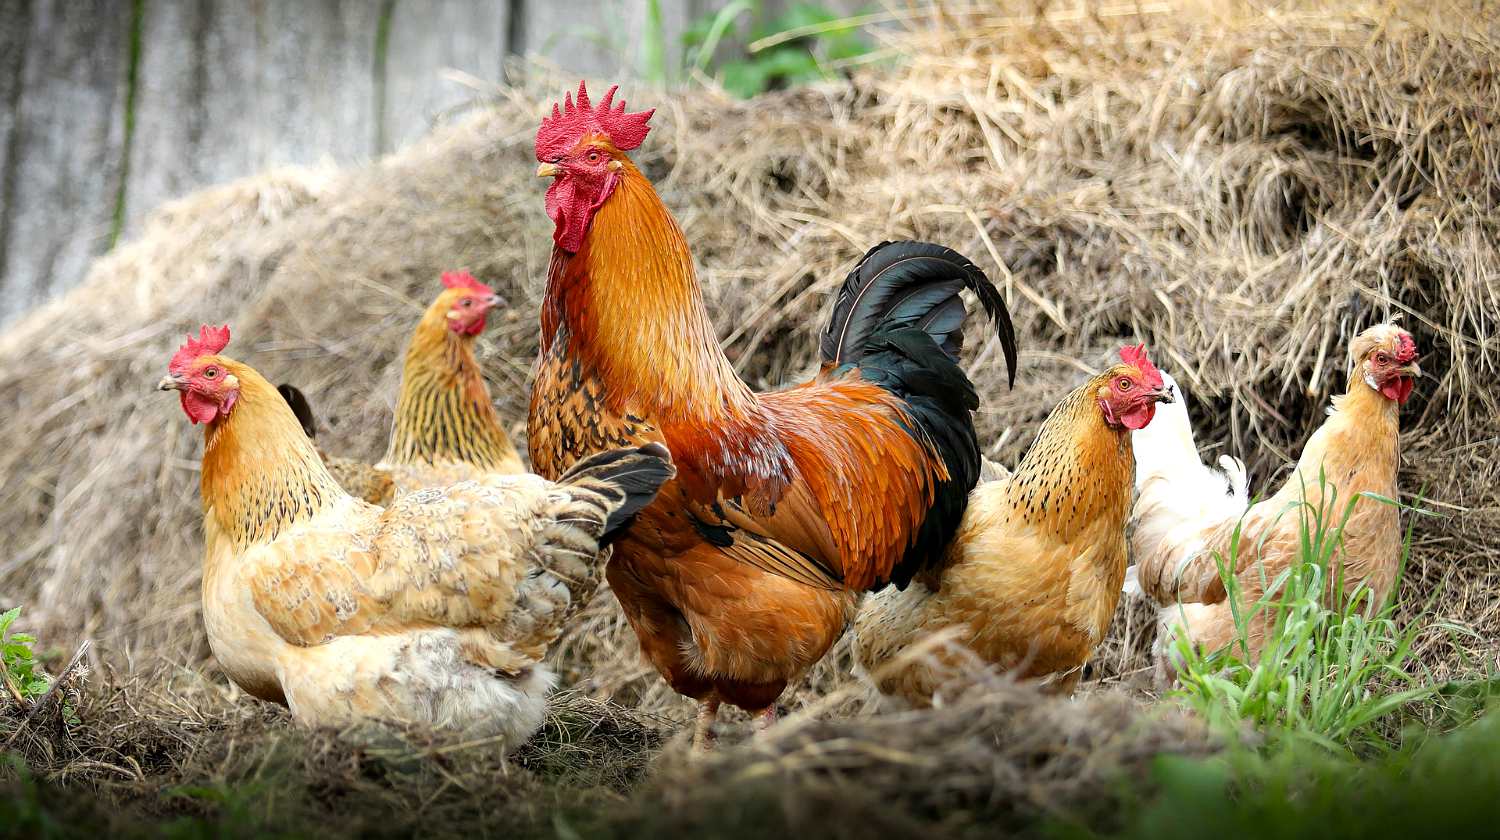 Featured | Chicken on a farm | Hen Pecked: An In-Depth Interview On Raising Chickens